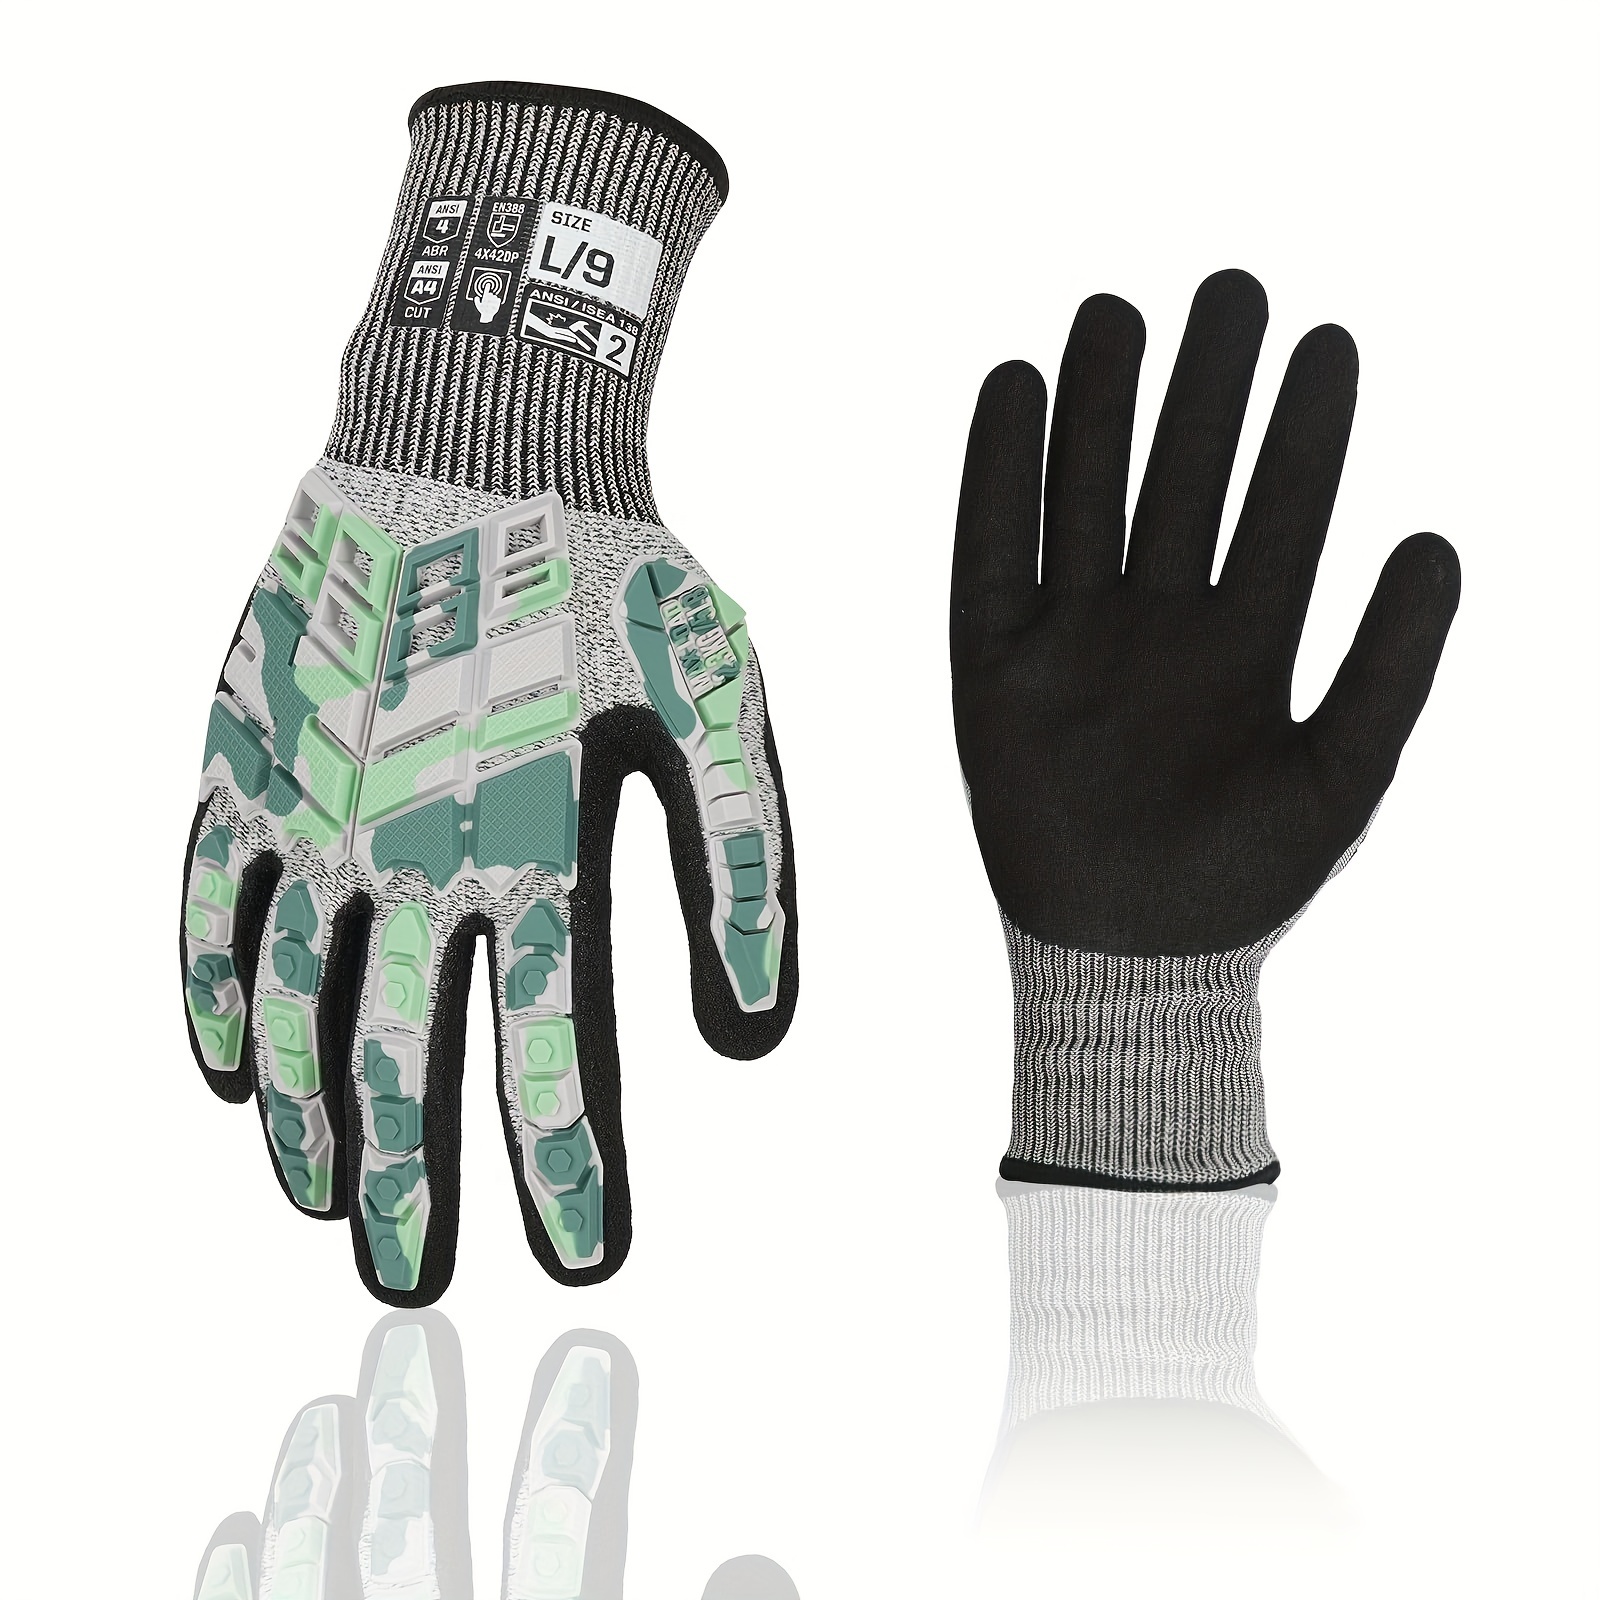 Toolant Level 6 Cut Resistant Work Gloves, Touchscreen Nitrile Coated Firm  Grip Gloves, For Warehouse, Gardening, Construction - Temu Oman